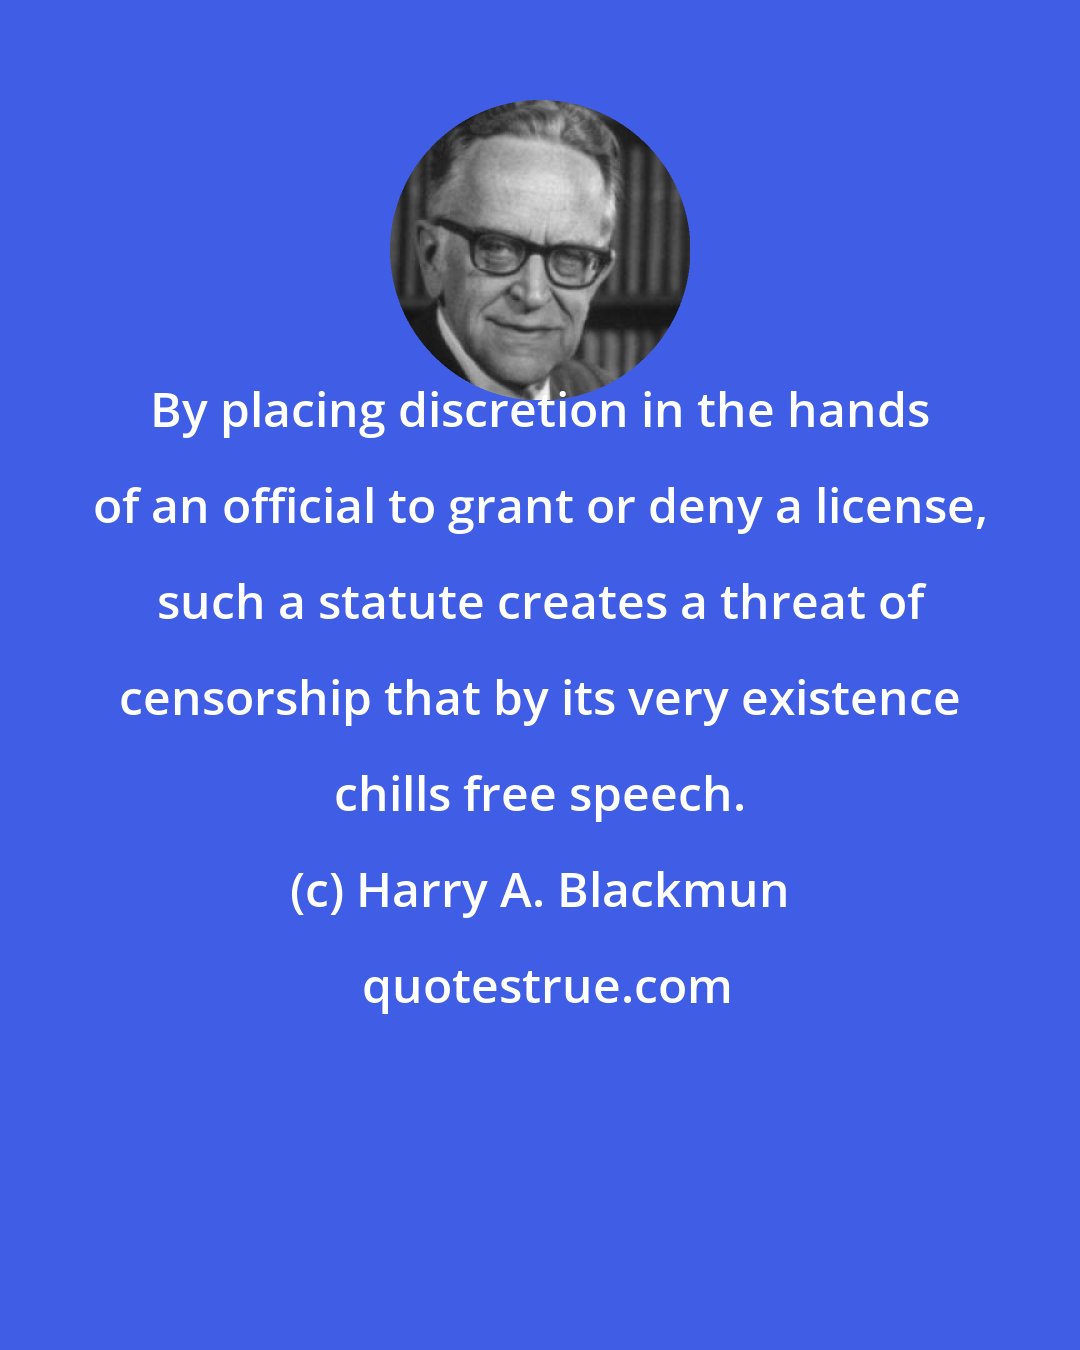 Harry A. Blackmun: By placing discretion in the hands of an official to grant or deny a license, such a statute creates a threat of censorship that by its very existence chills free speech.